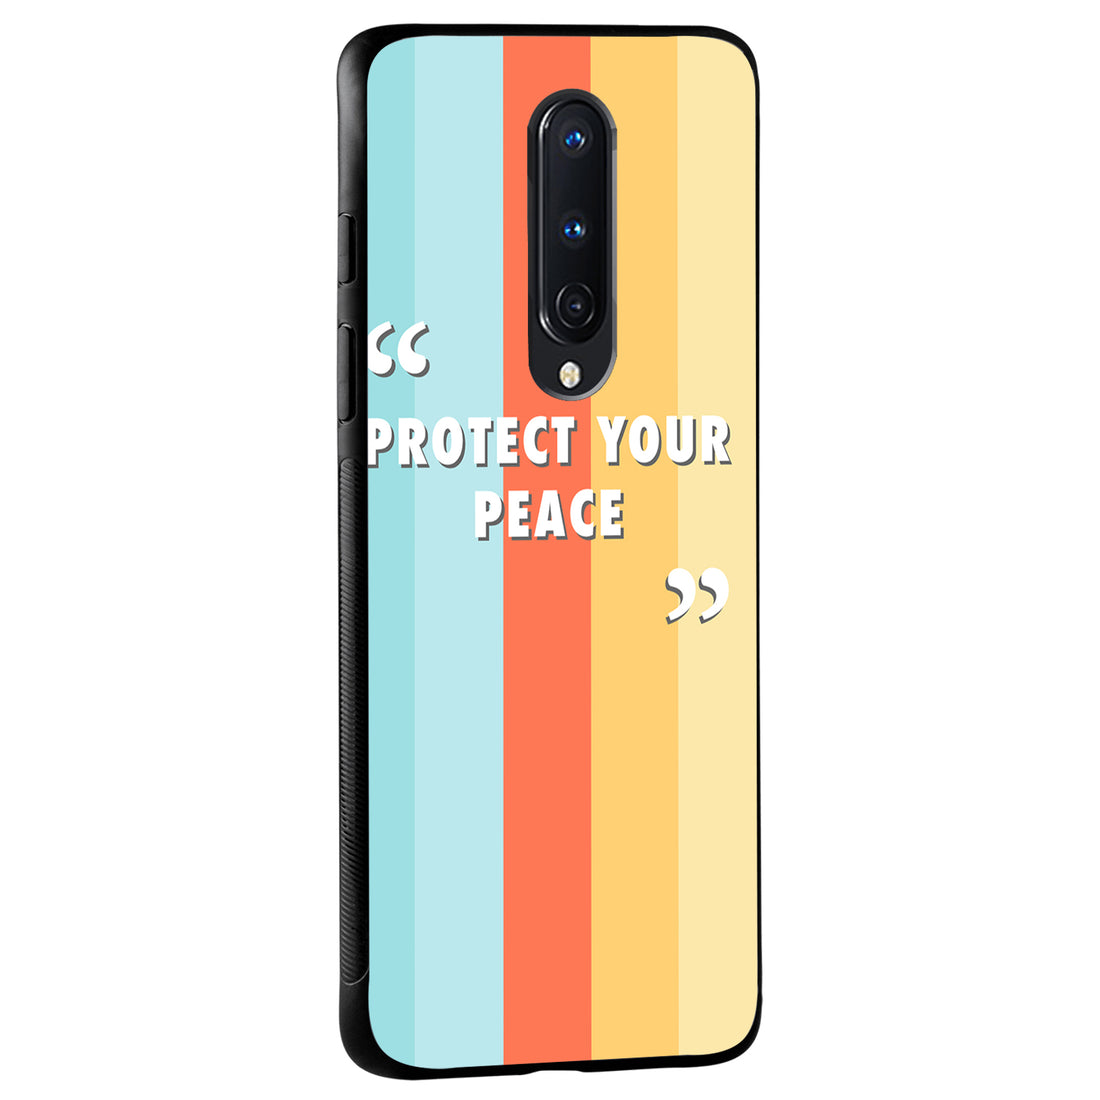 Protect your peace Motivational Quotes Oneplus 8 Back Case